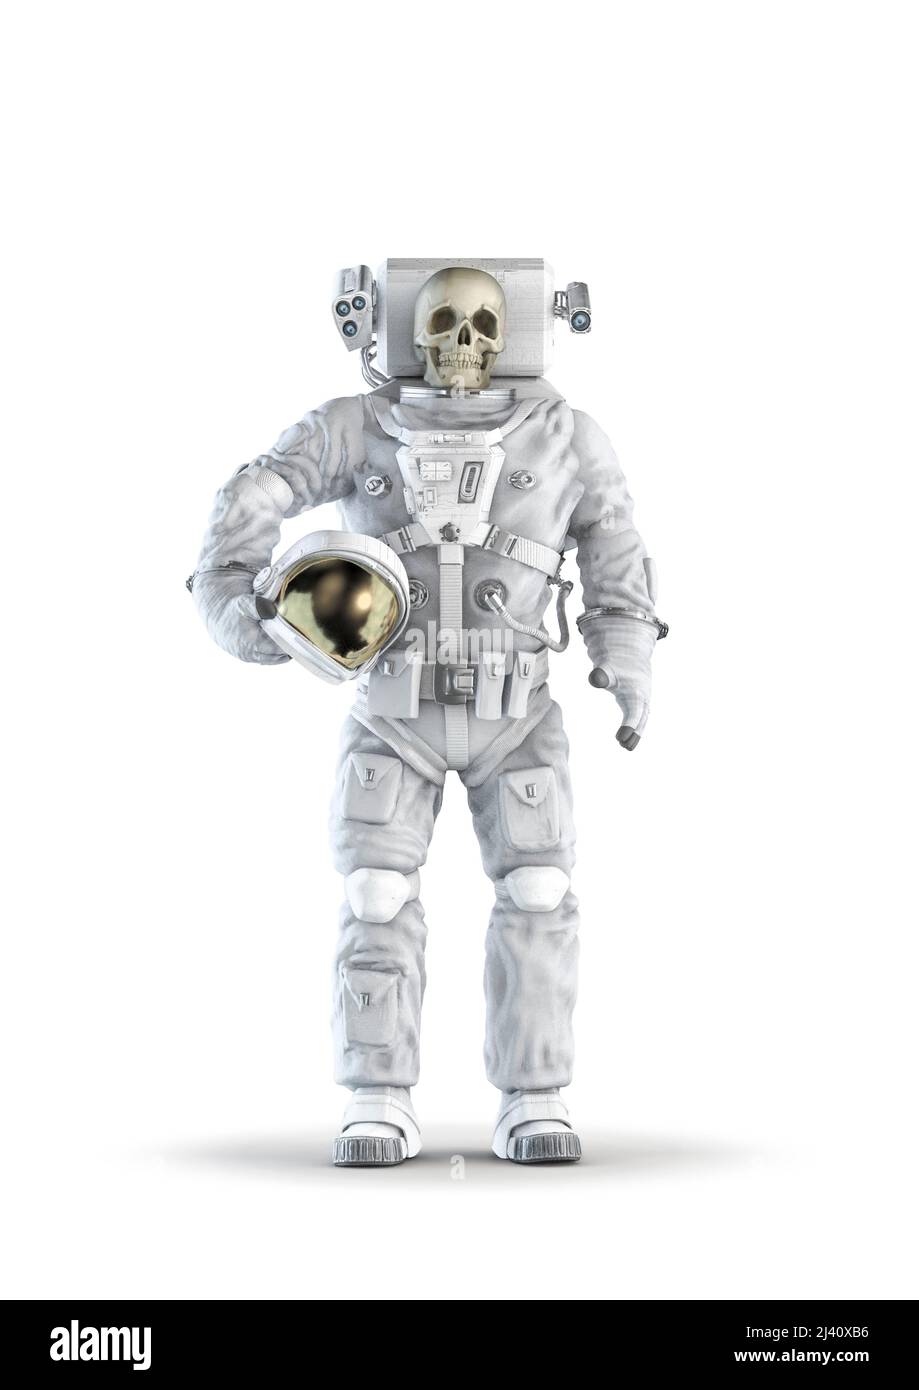 Dead astronaut concept - 3D illustration of skull faced space suit wearing male figure isolated on white studio background Stock Photo